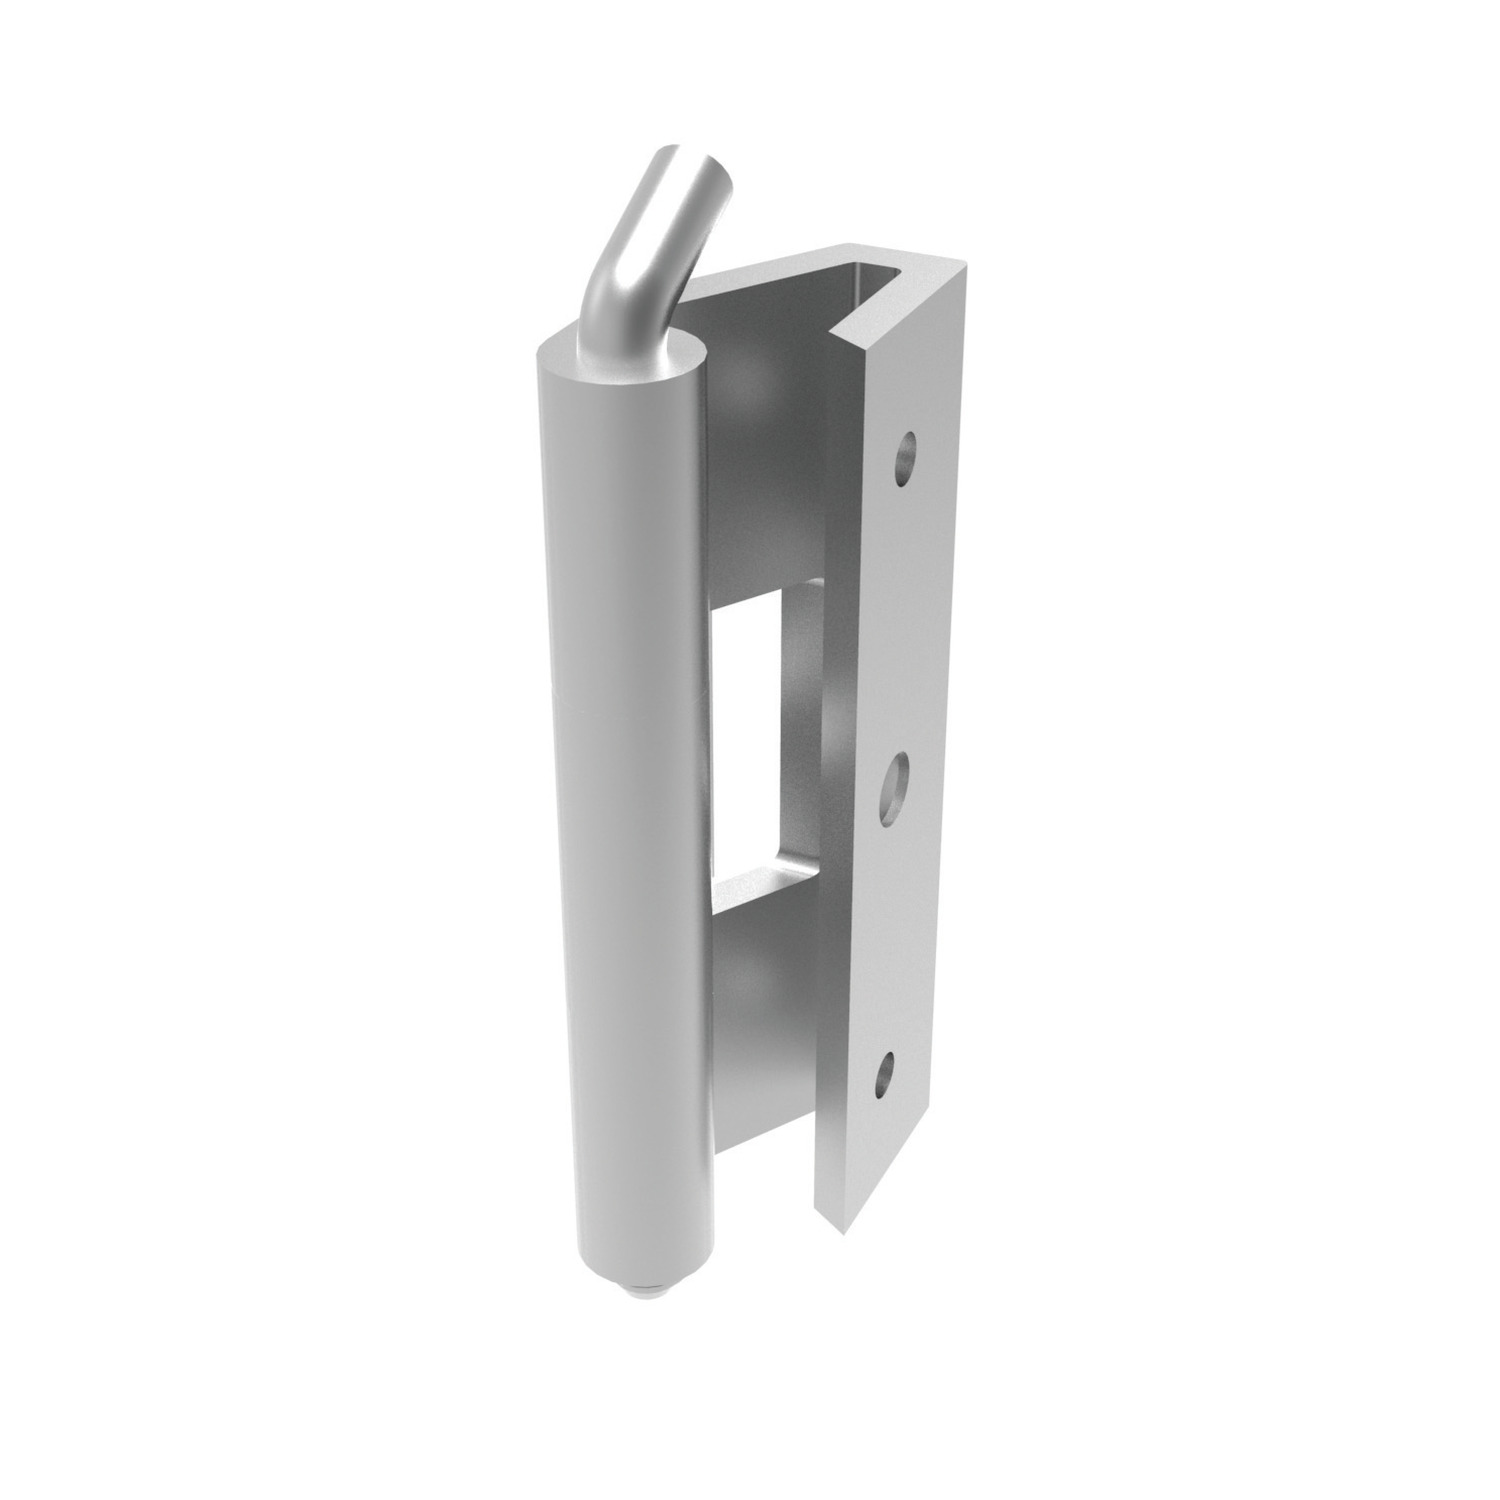 S2153 - Concealed Pivot Hinges - Lift Off